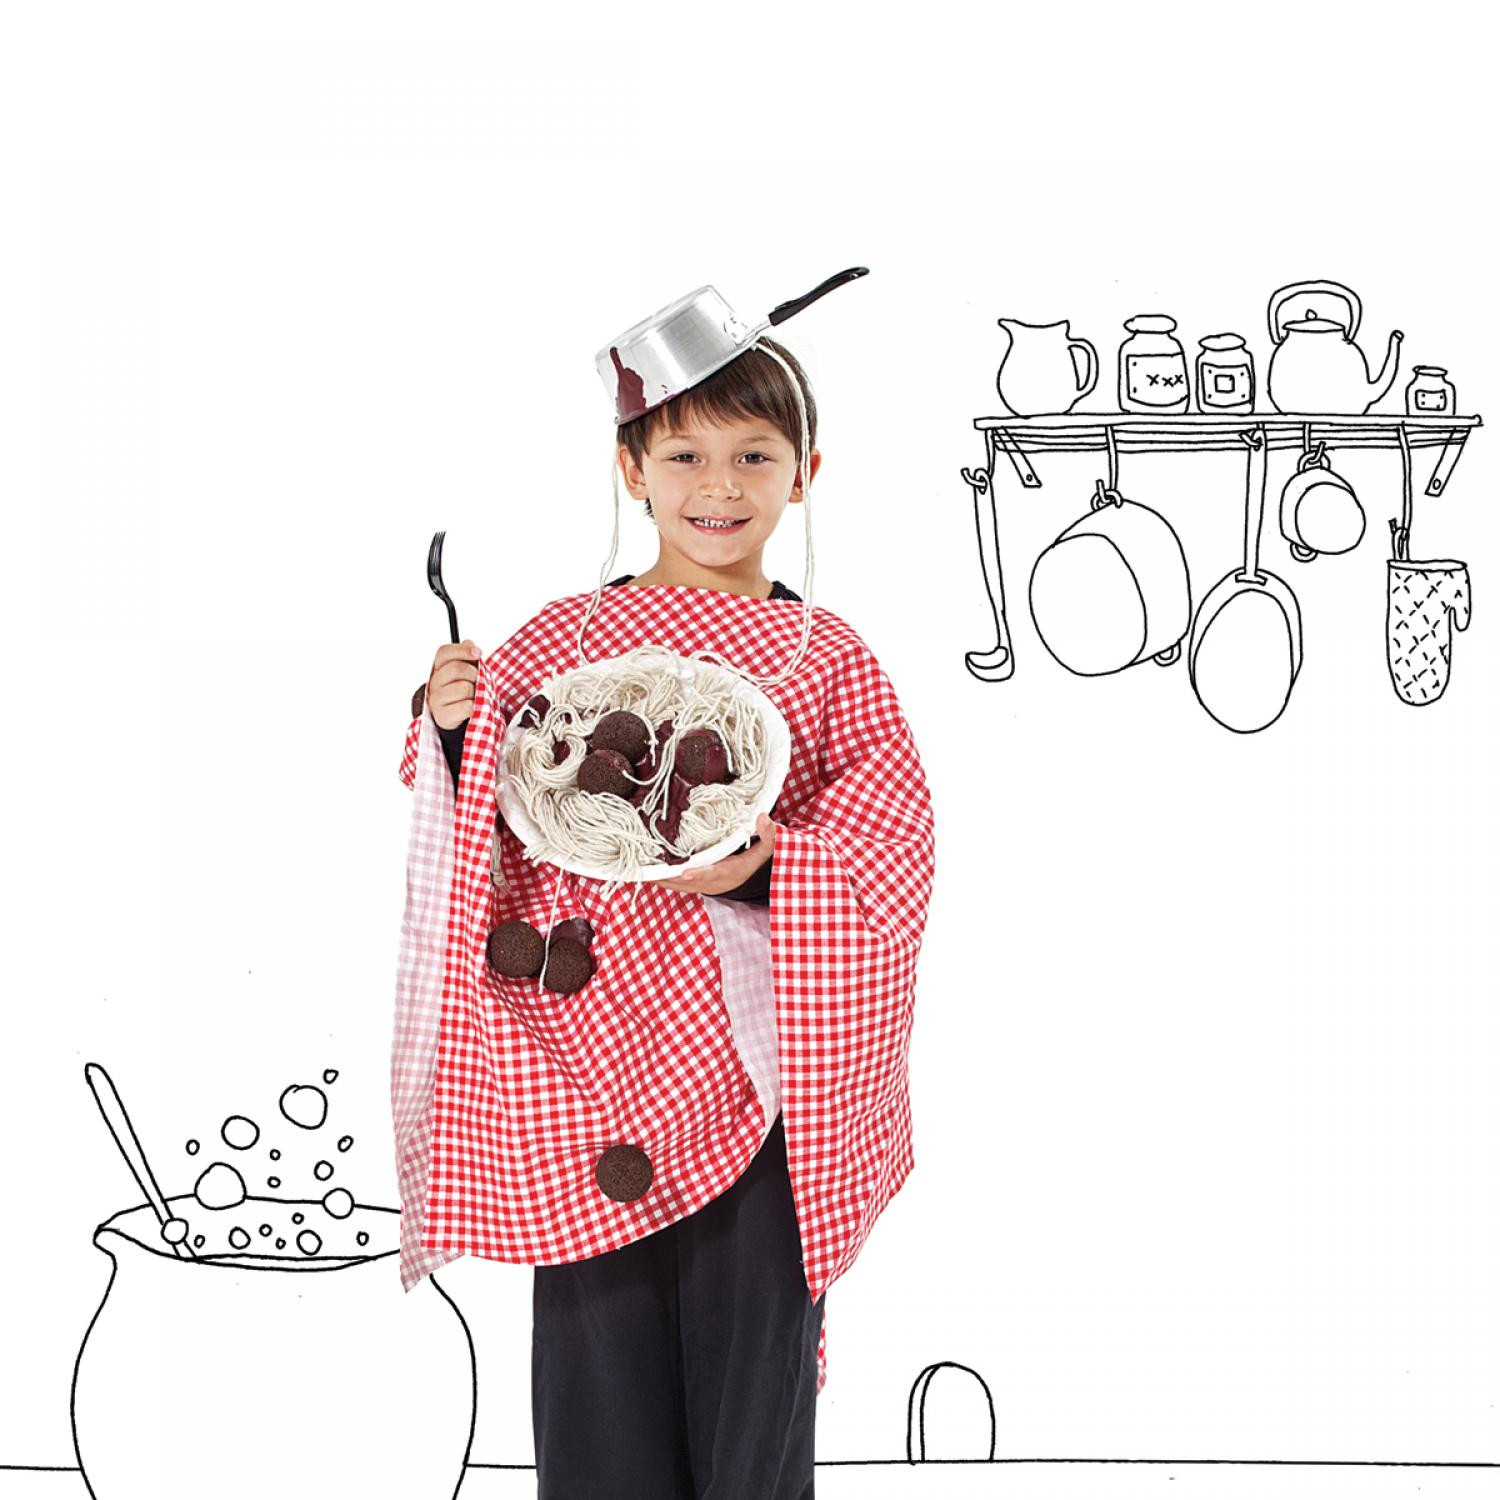 Easy DIY Costumes For Toddlers
 35 Easy Homemade Halloween Costumes for Kids